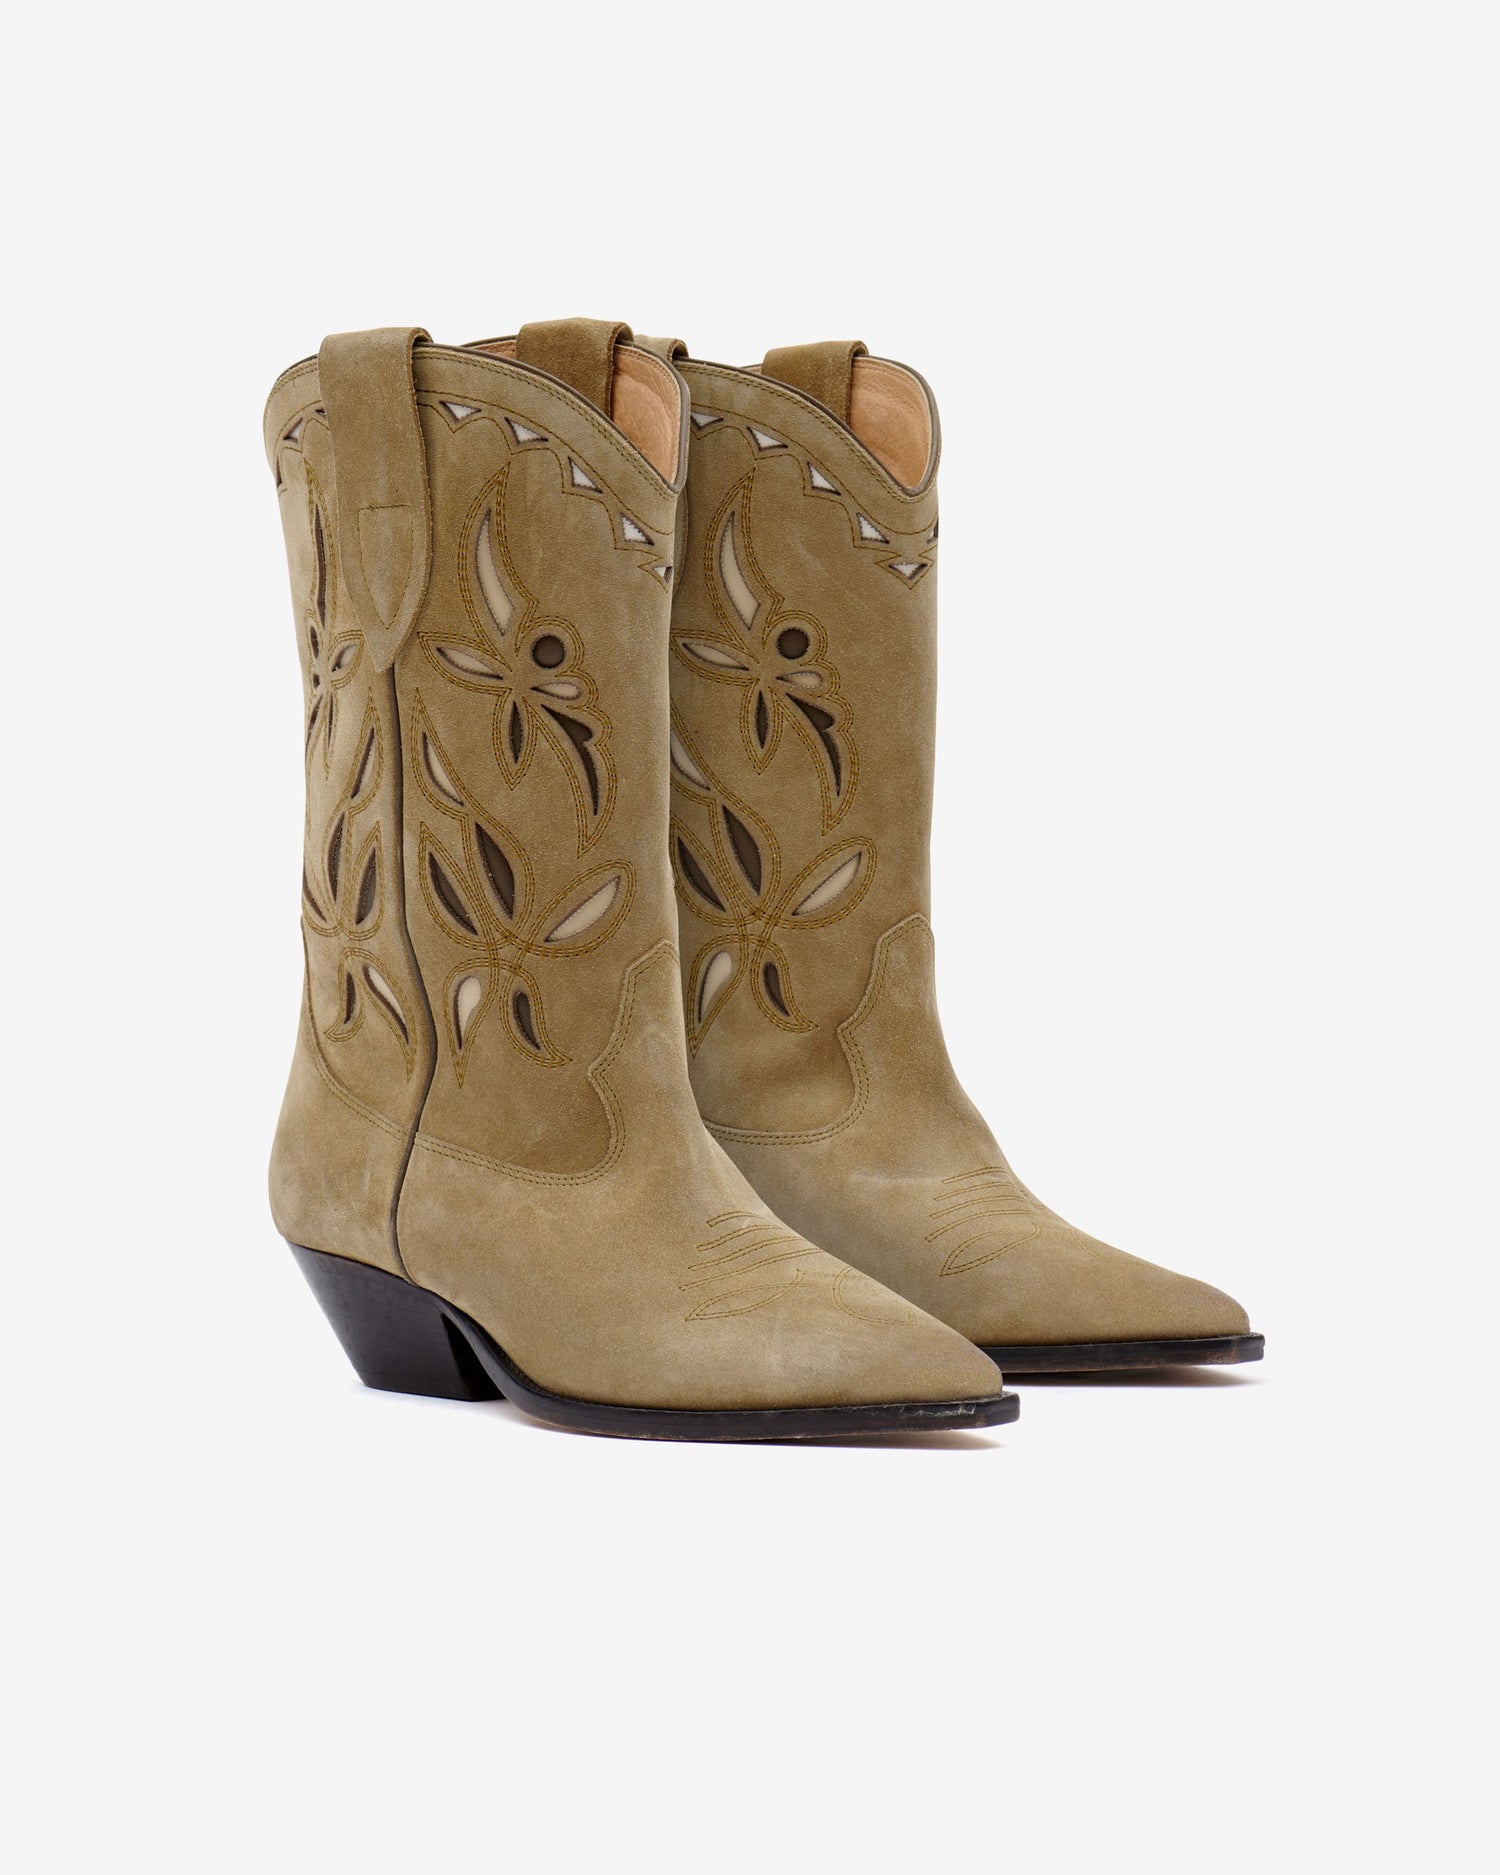 ISABEL MARANT: DUERTO cowboy boots, taupe suede